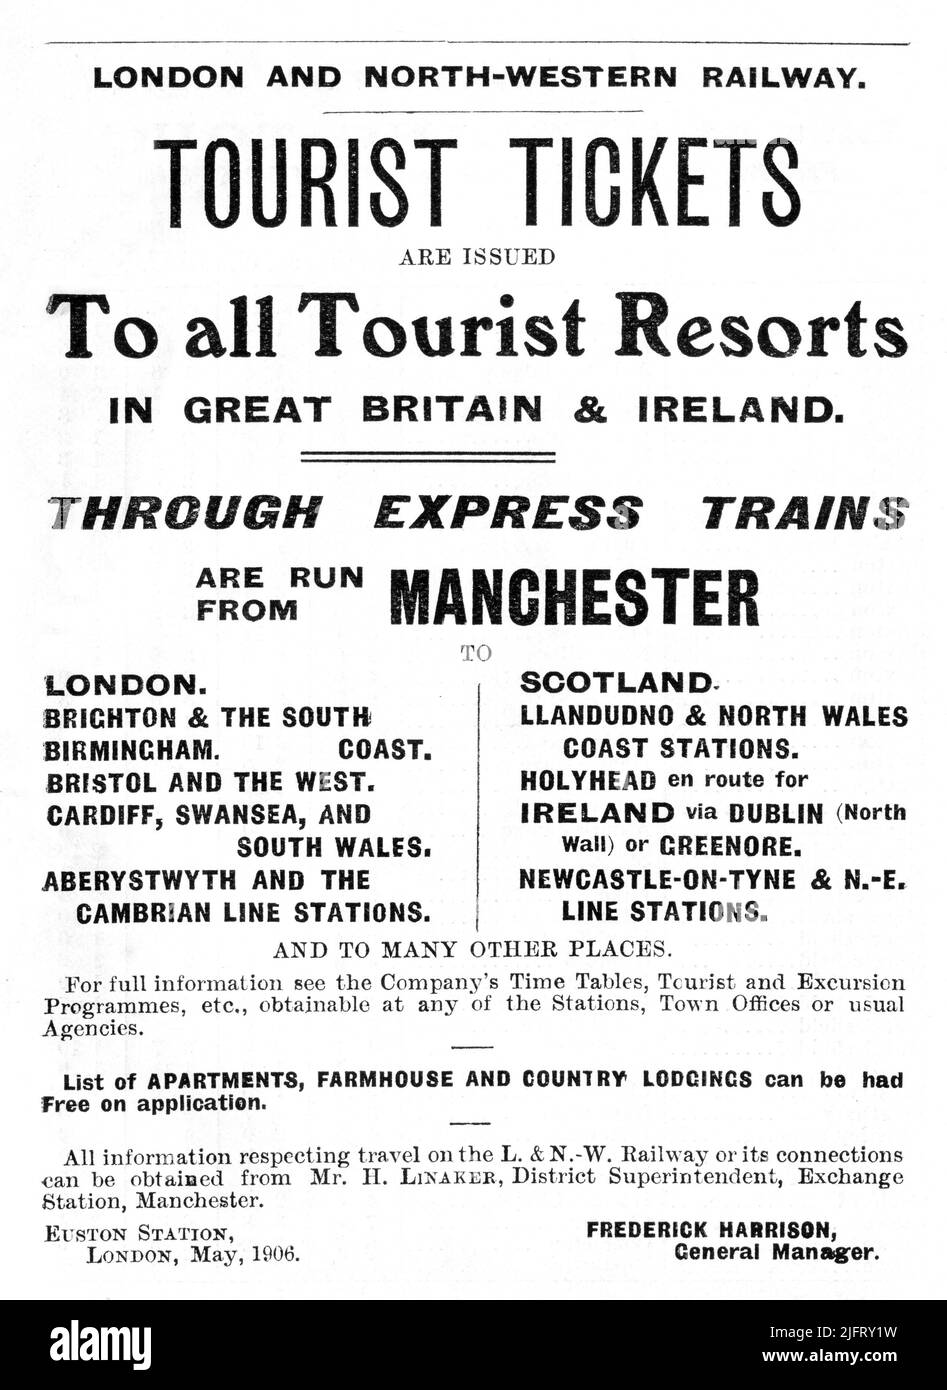 A 1906 advertisement promoting London and North-western Railway’s Tourist Tickets. “Issued to all Tourist Resorts in Great Britain & Ireland”. “Through Express Trains are run from Manchester to London, Scotland, Brighton & South Coast, Birmingham, Bristol, Cardiff...etc”. Stock Photo